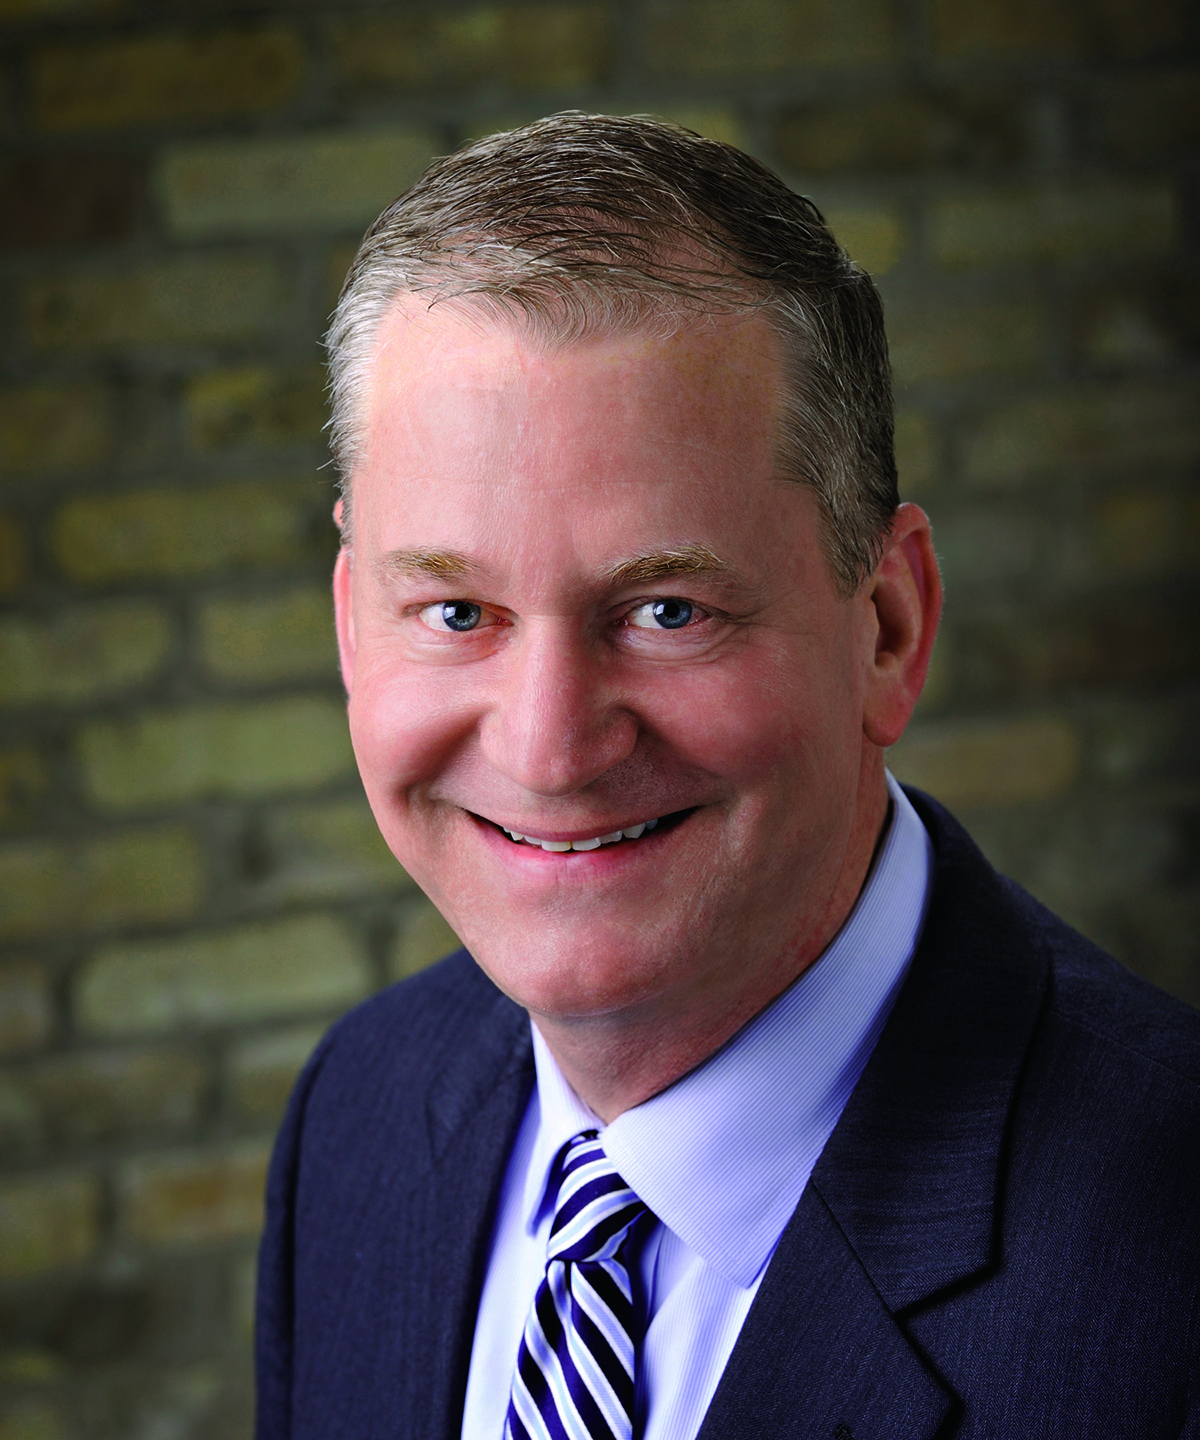 Paul Buege is president and COO of Pewaukee, Wis.-based Inlanta Mortgage